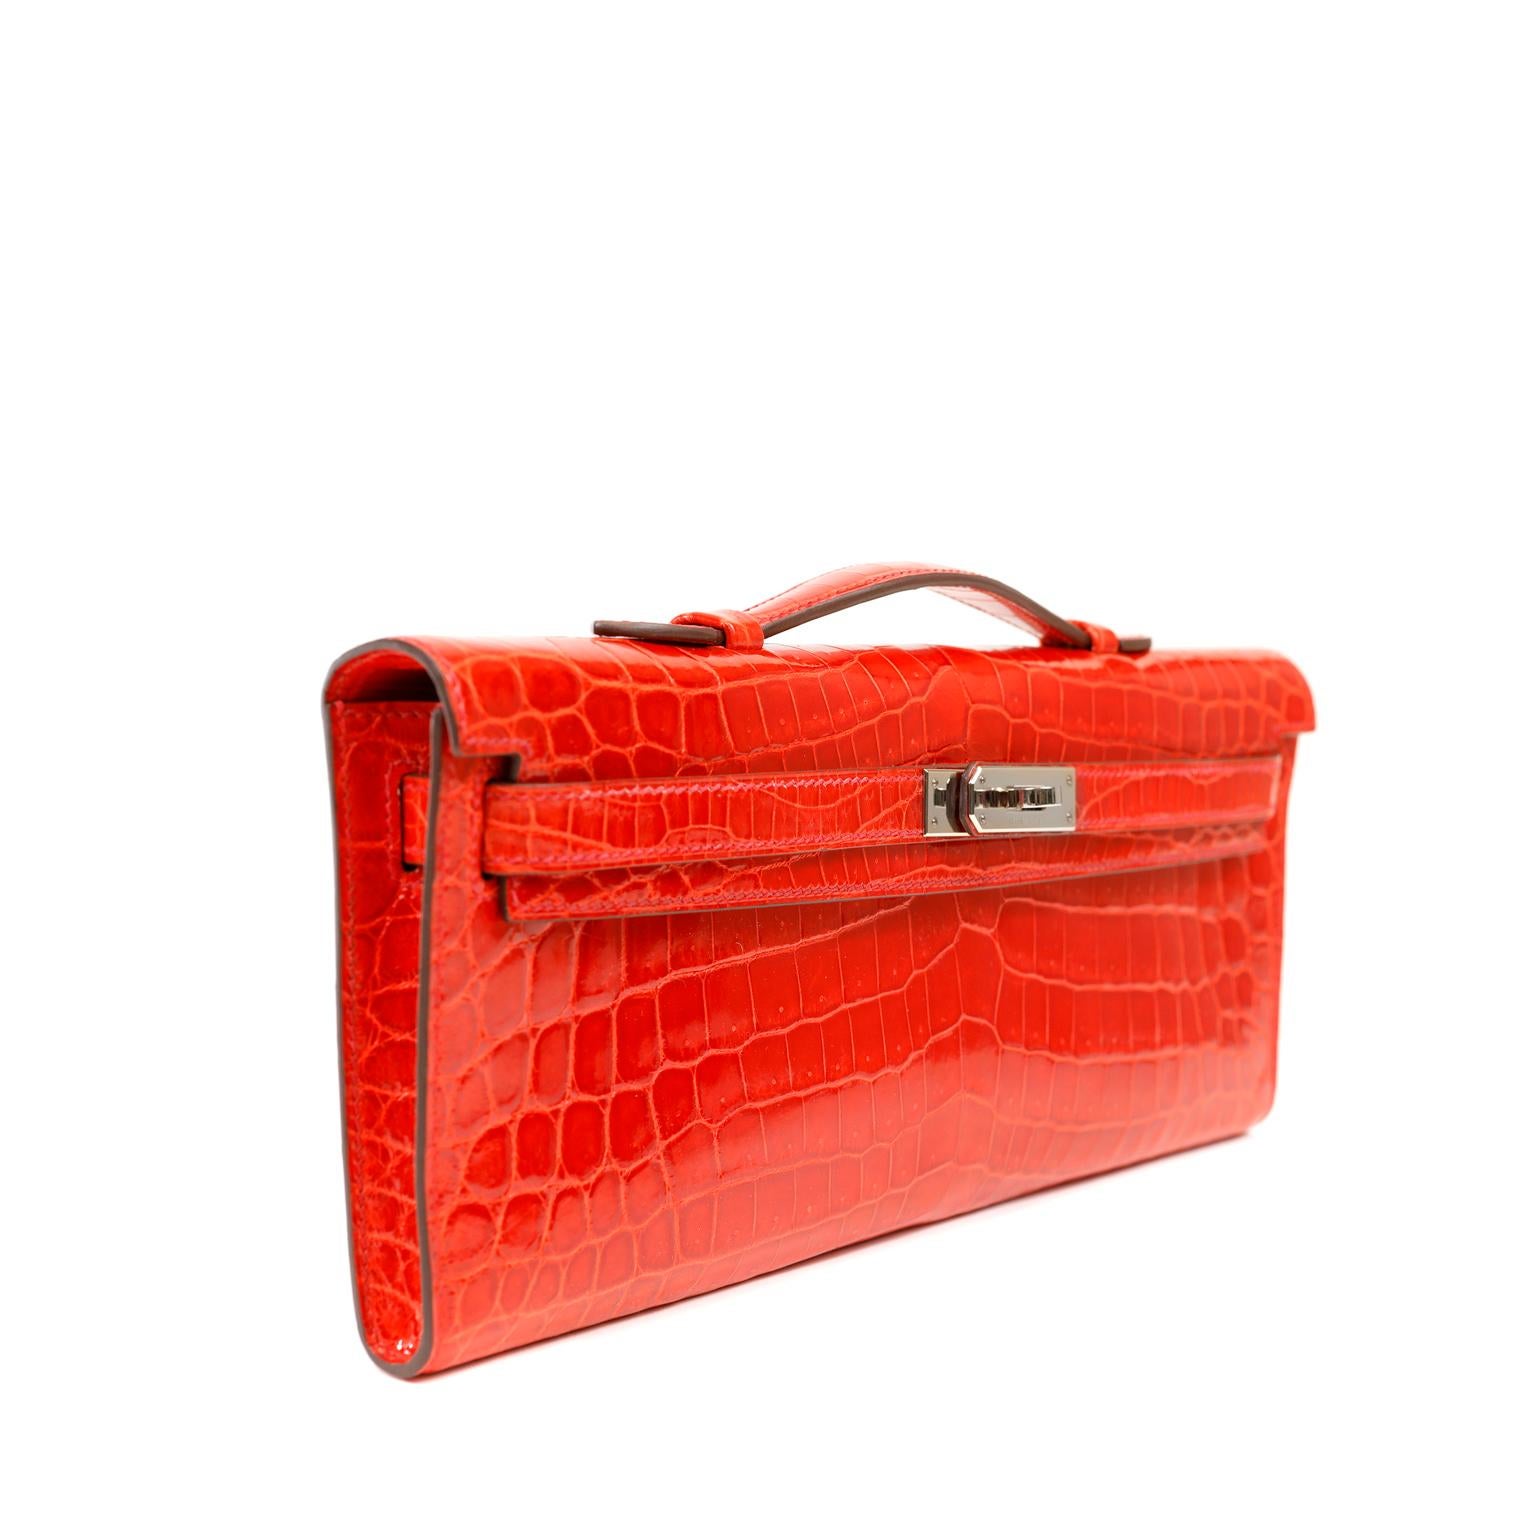 This authentic Hermès Vivid Red Crocodile Kelly Cut Clutch is in pristine condition.  Hand crafted by skilled artisans; the Kelly Cut is extremely rare in exotic Niloticus crocodile skin with gold hardware.  The Kelly Cut is an elegant and timeless